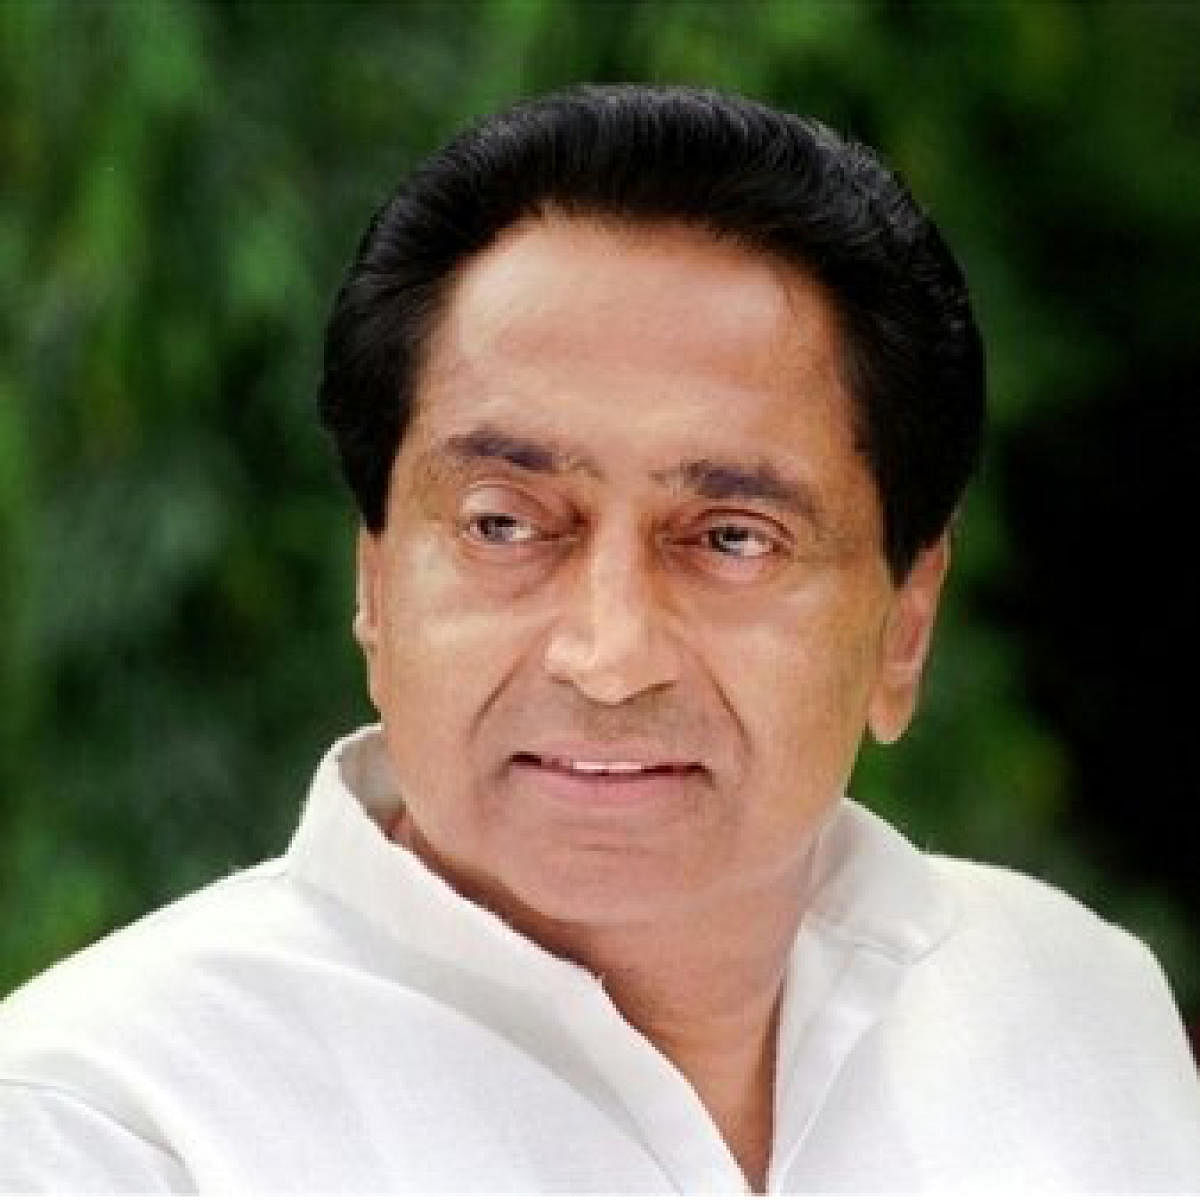 The Kamal Nath government has set in motion the process for setting up a legislative council which the Congress had promised in its election manifesto for the 2018 assembly election. (File photo)